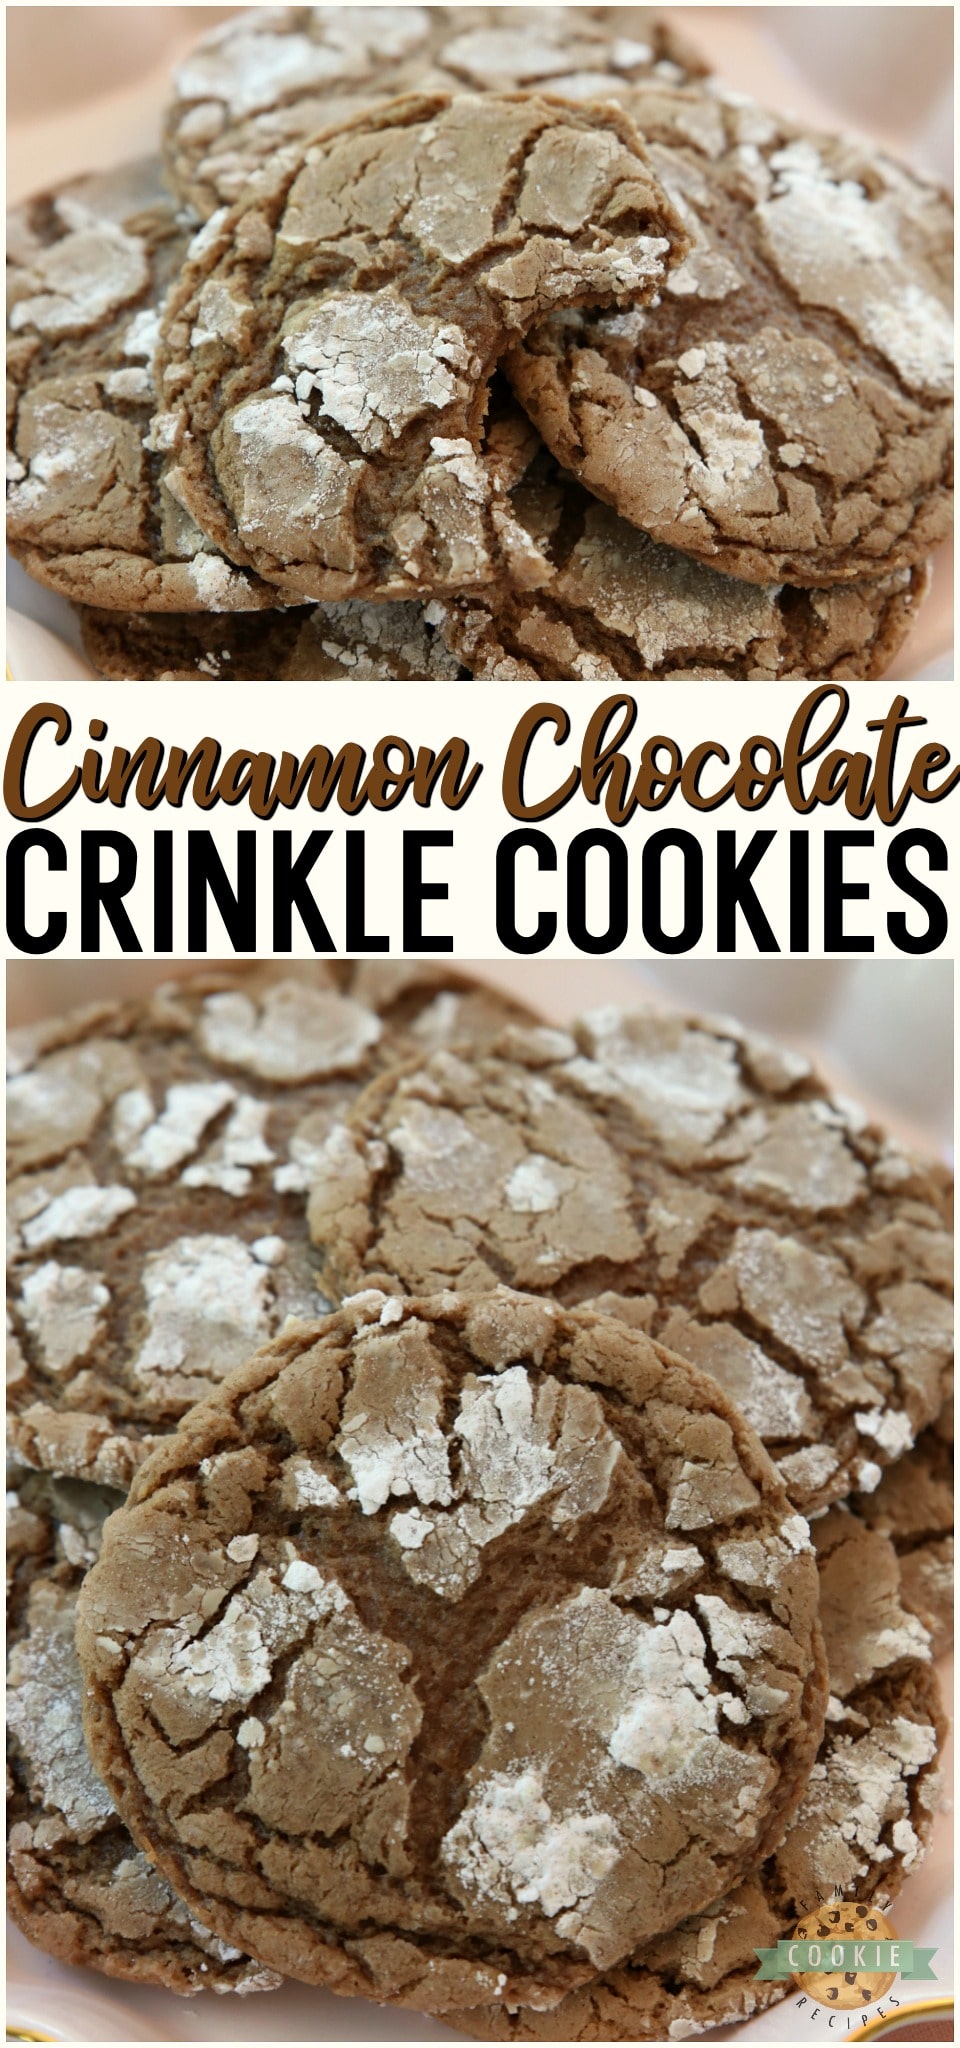 Cinnamon Chocolate Crinkle Cookies taste like Mexican hot chocolate and are amazing! Soft & chewy cookies with a fantastic chocolate taste with a hint of cinnamon. #cookies #chocolate #cinnamon #crinkle #baking #dessert #recipe from FAMILY COOKIE RECIPES via @buttergirls